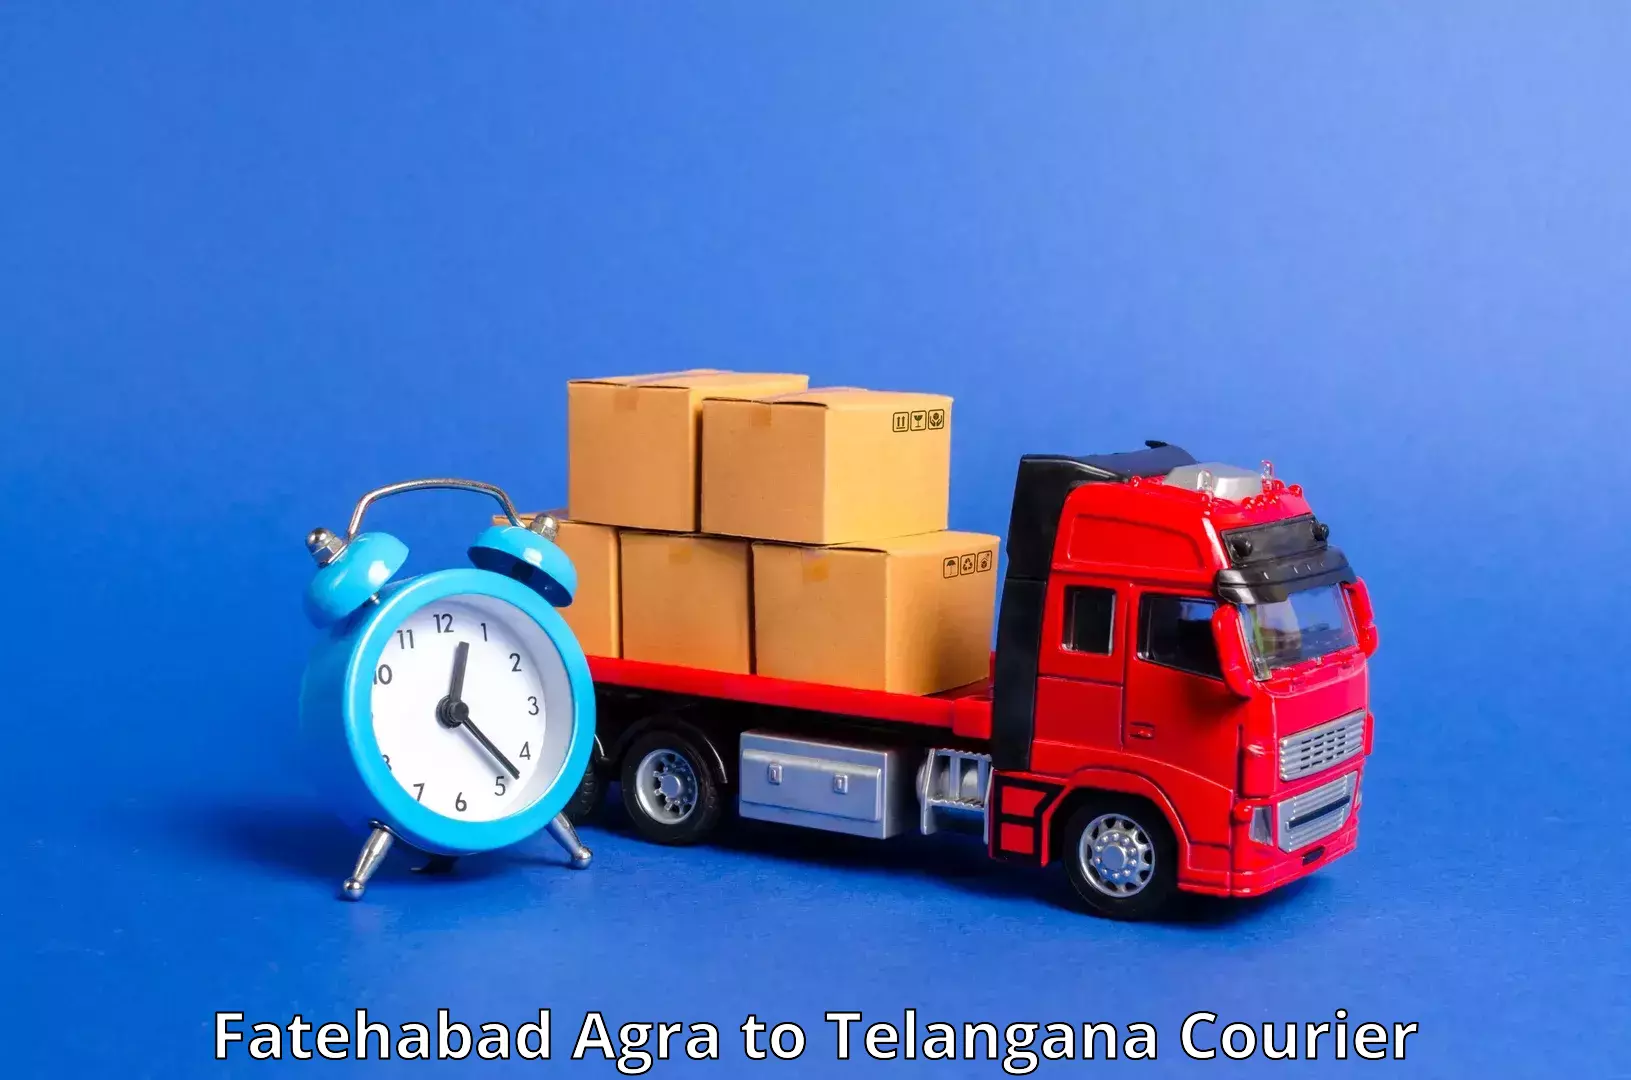 Subscription-based courier Fatehabad Agra to Patancheru